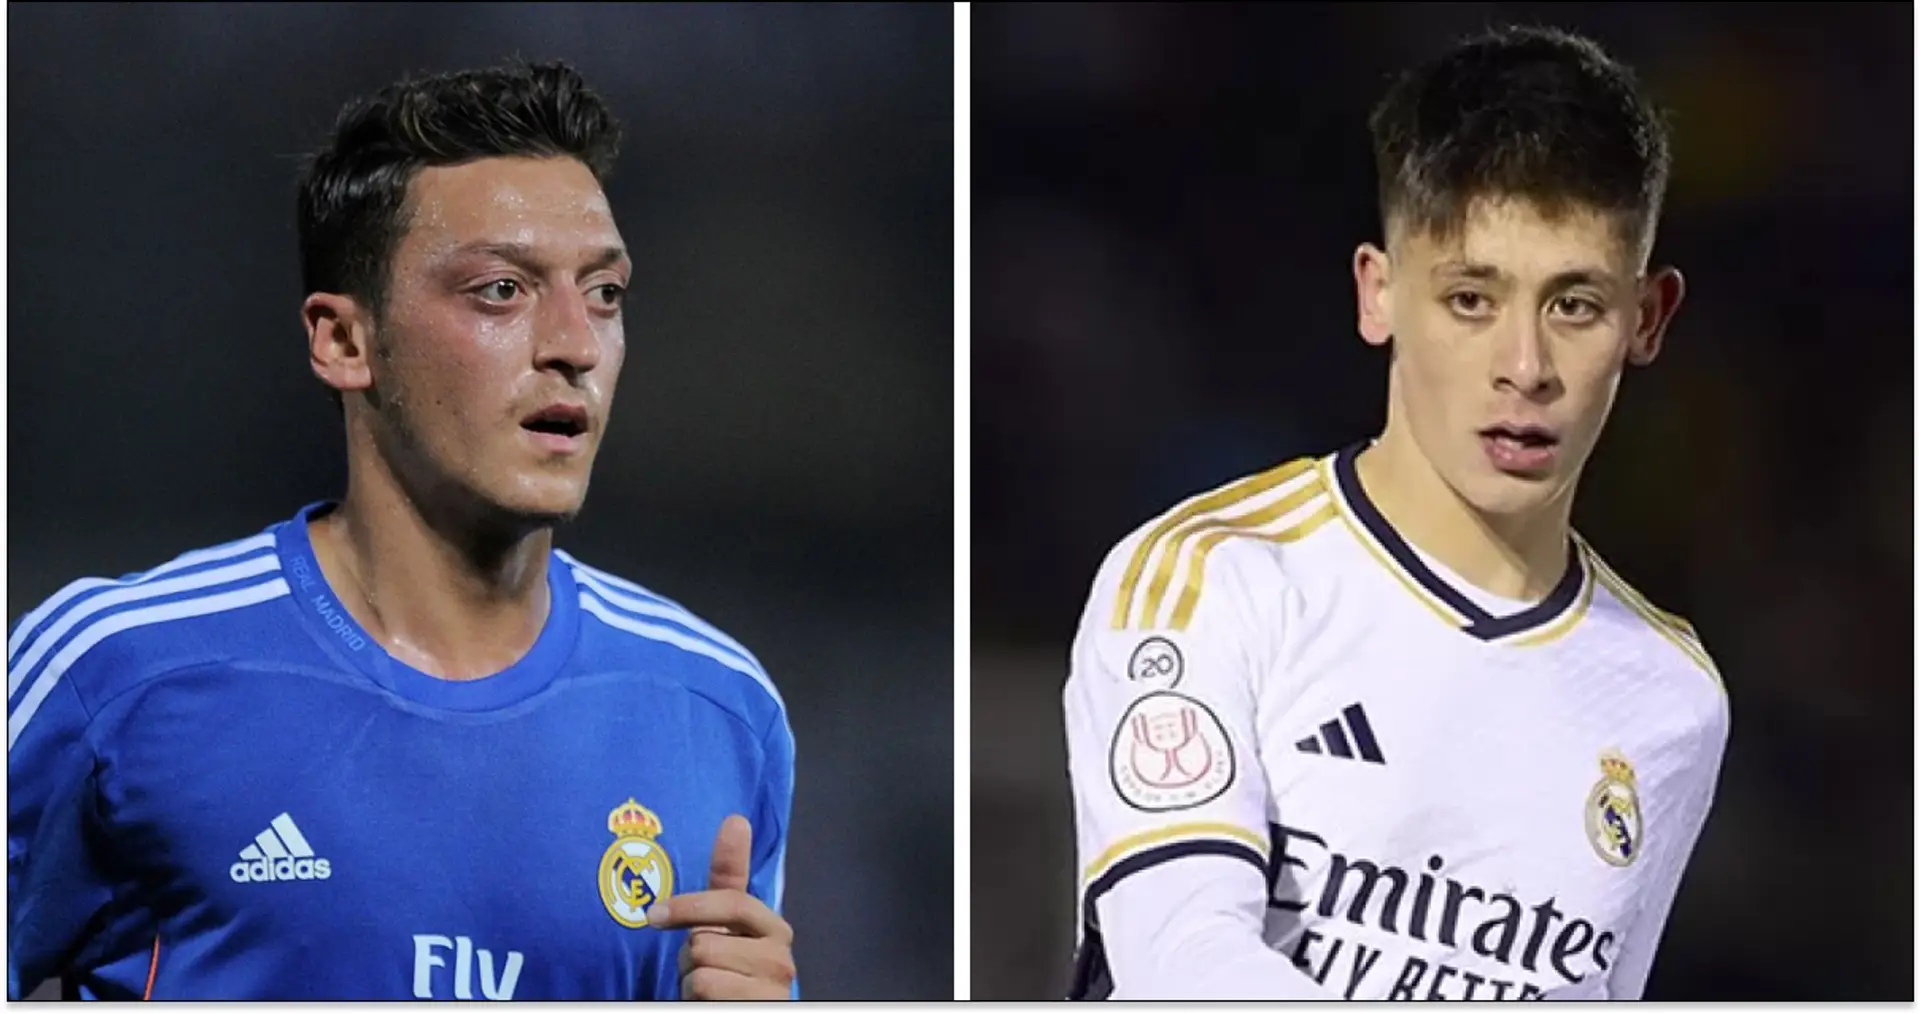 Spotted: Guler channels his inner Ozil with brilliant through ball on Real Madrid debut